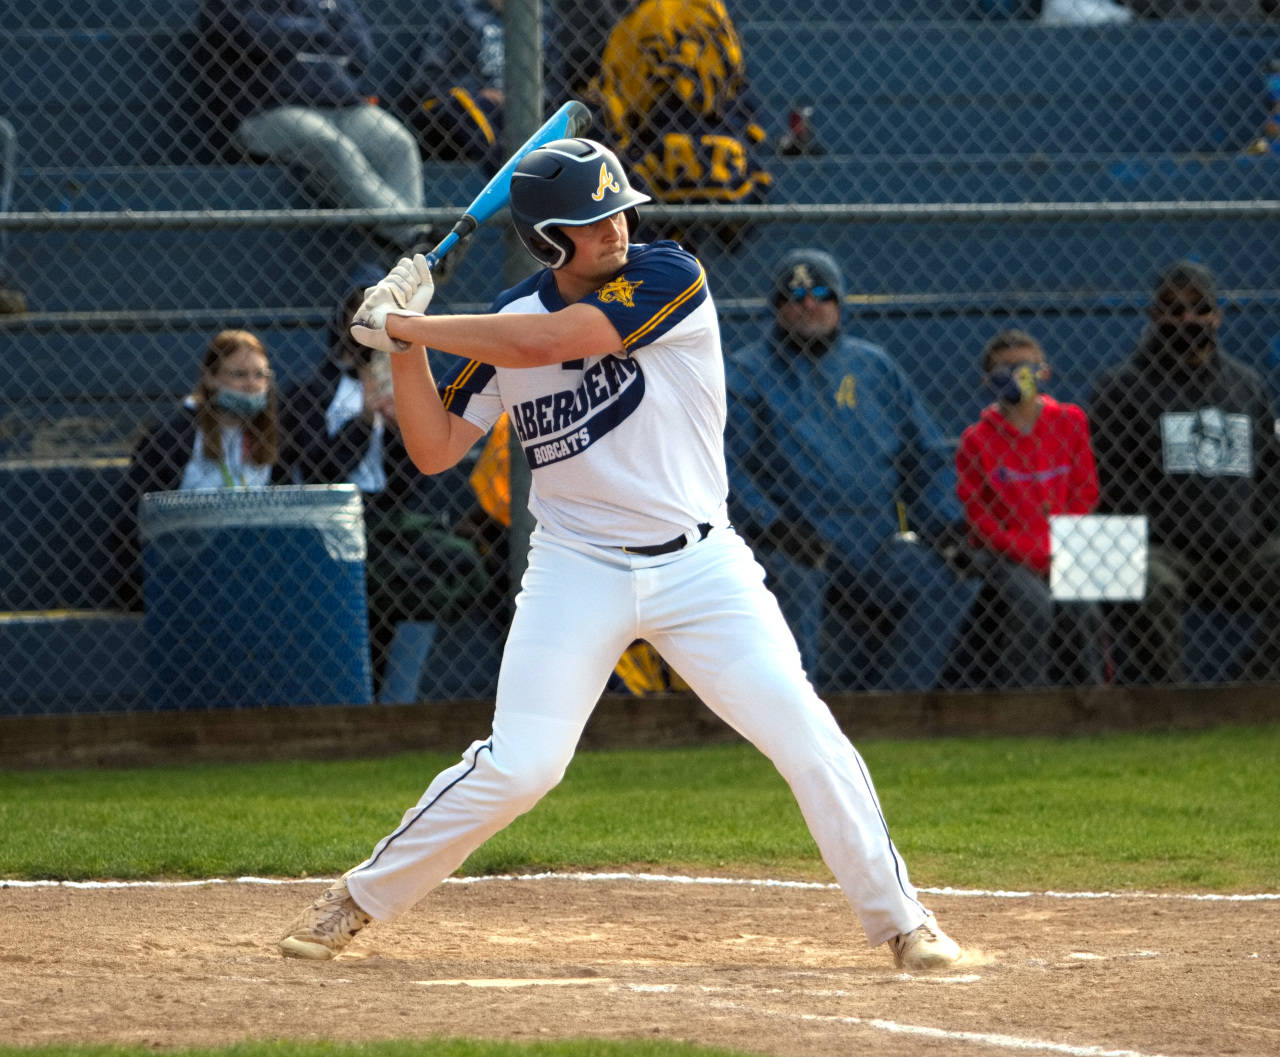 DAILY WORLD FILE PHOTO Aberdeen senior Eli Brown, seen here in a file photo, was named a 2A Evergreen League First Team infielder for the 2021 season last week.